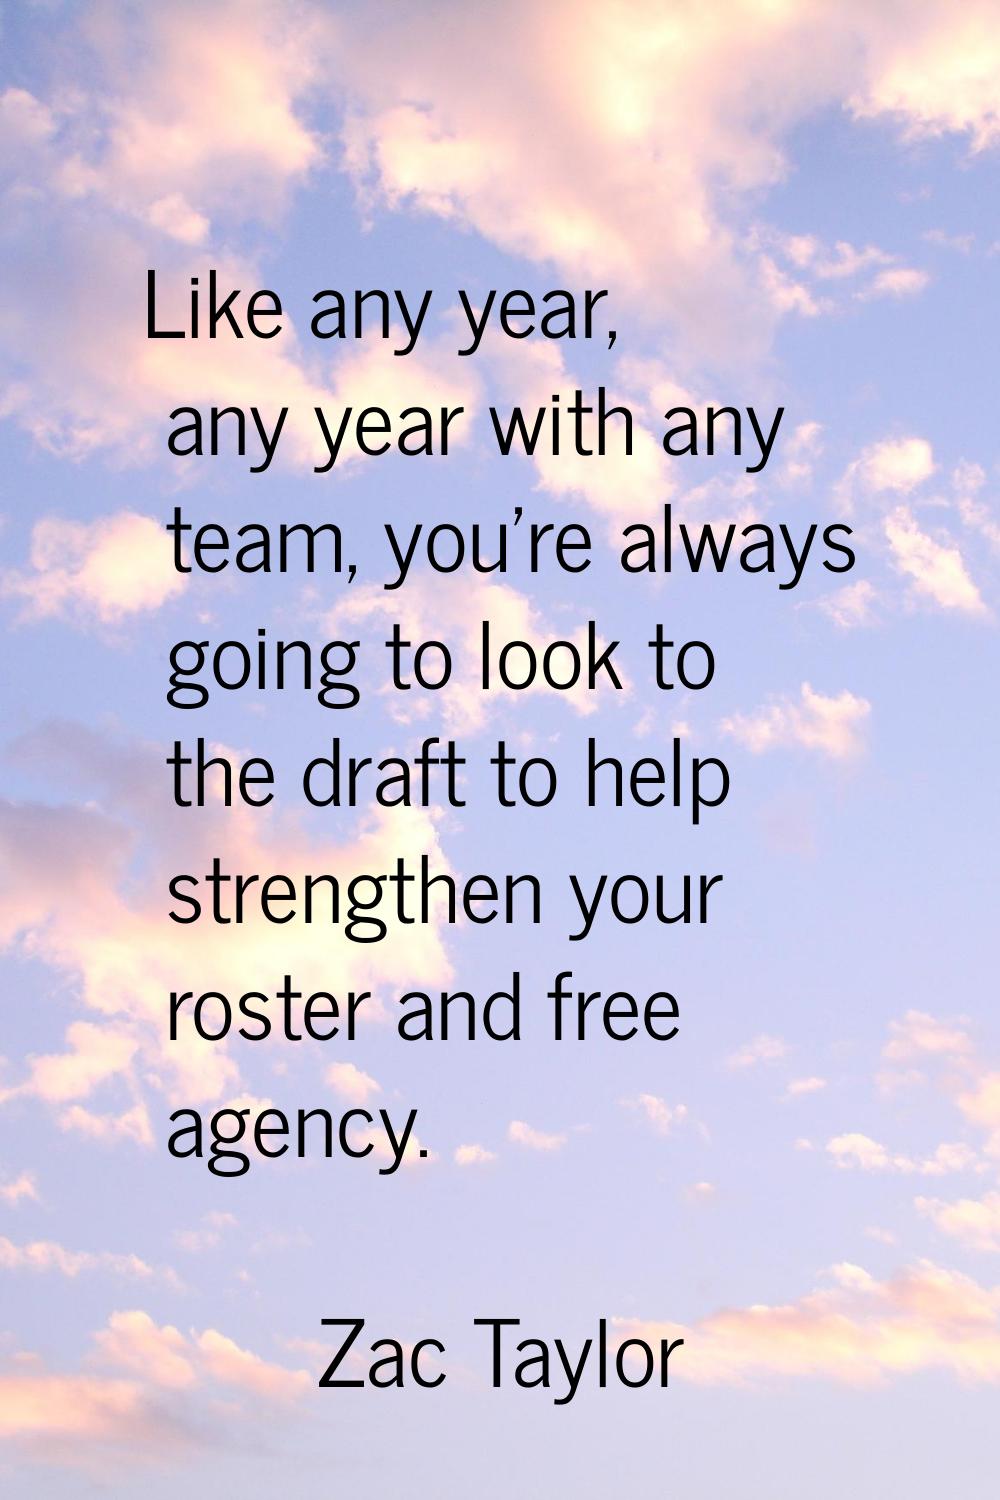 Like any year, any year with any team, you're always going to look to the draft to help strengthen 